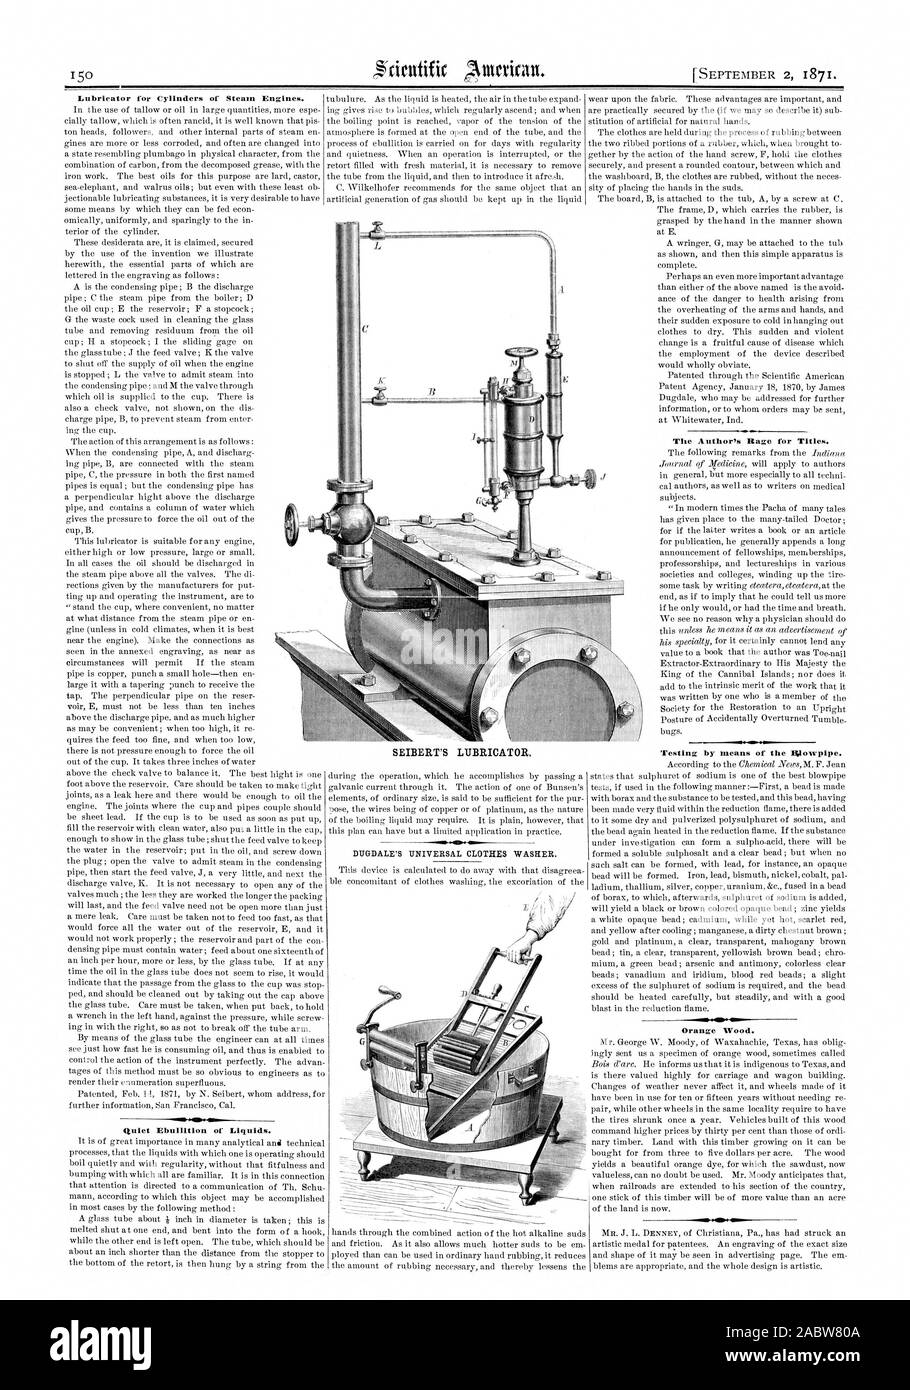 Lubricator for Cylinders of Steam Engines. Quiet Ebullition of Liquids. The Author's Rage for Titles. Orange Wood., scientific american, 1871-09-02 Stock Photo